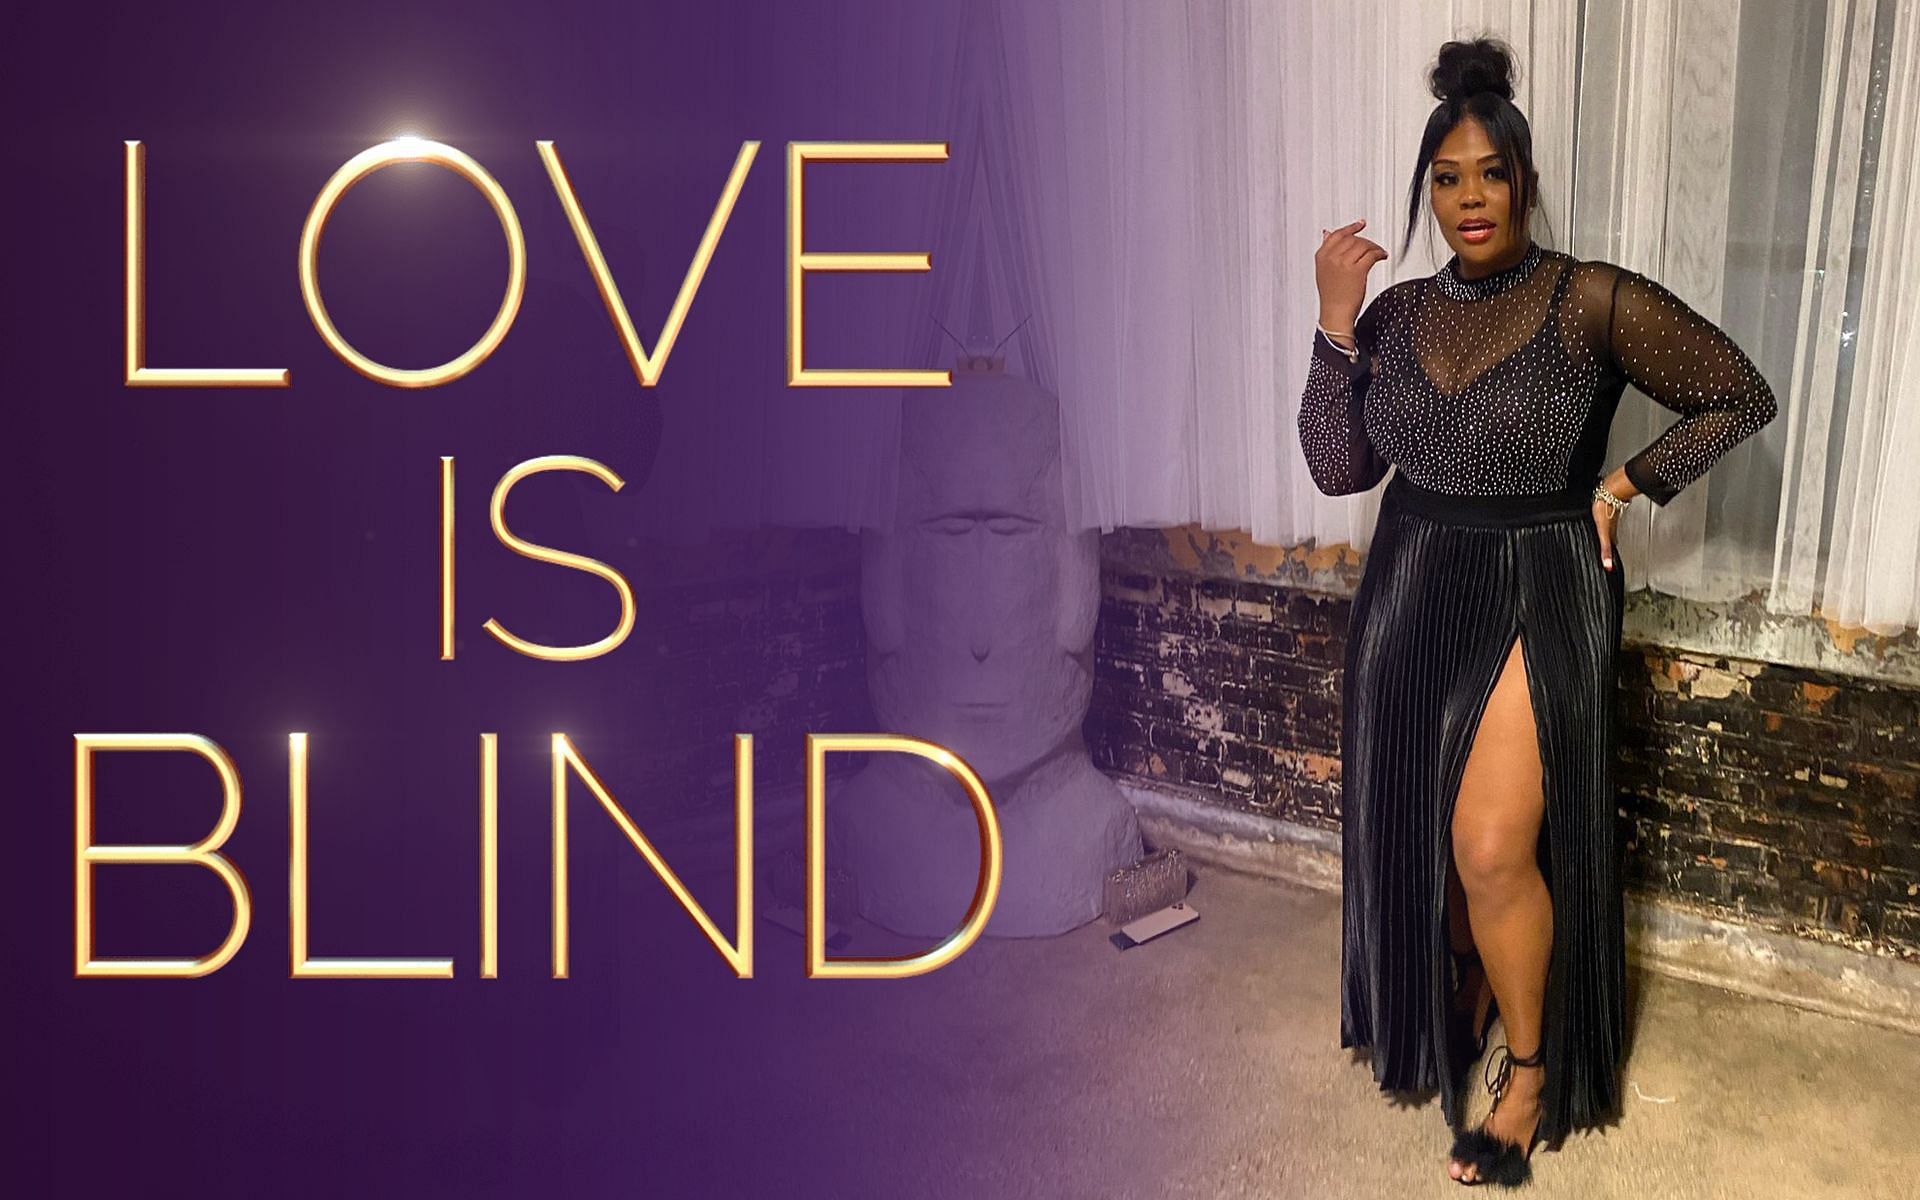 Entrepreneur Chassidy Mickale to star in Love Is Blind airing on February 11 (Image via Sportskeeda)